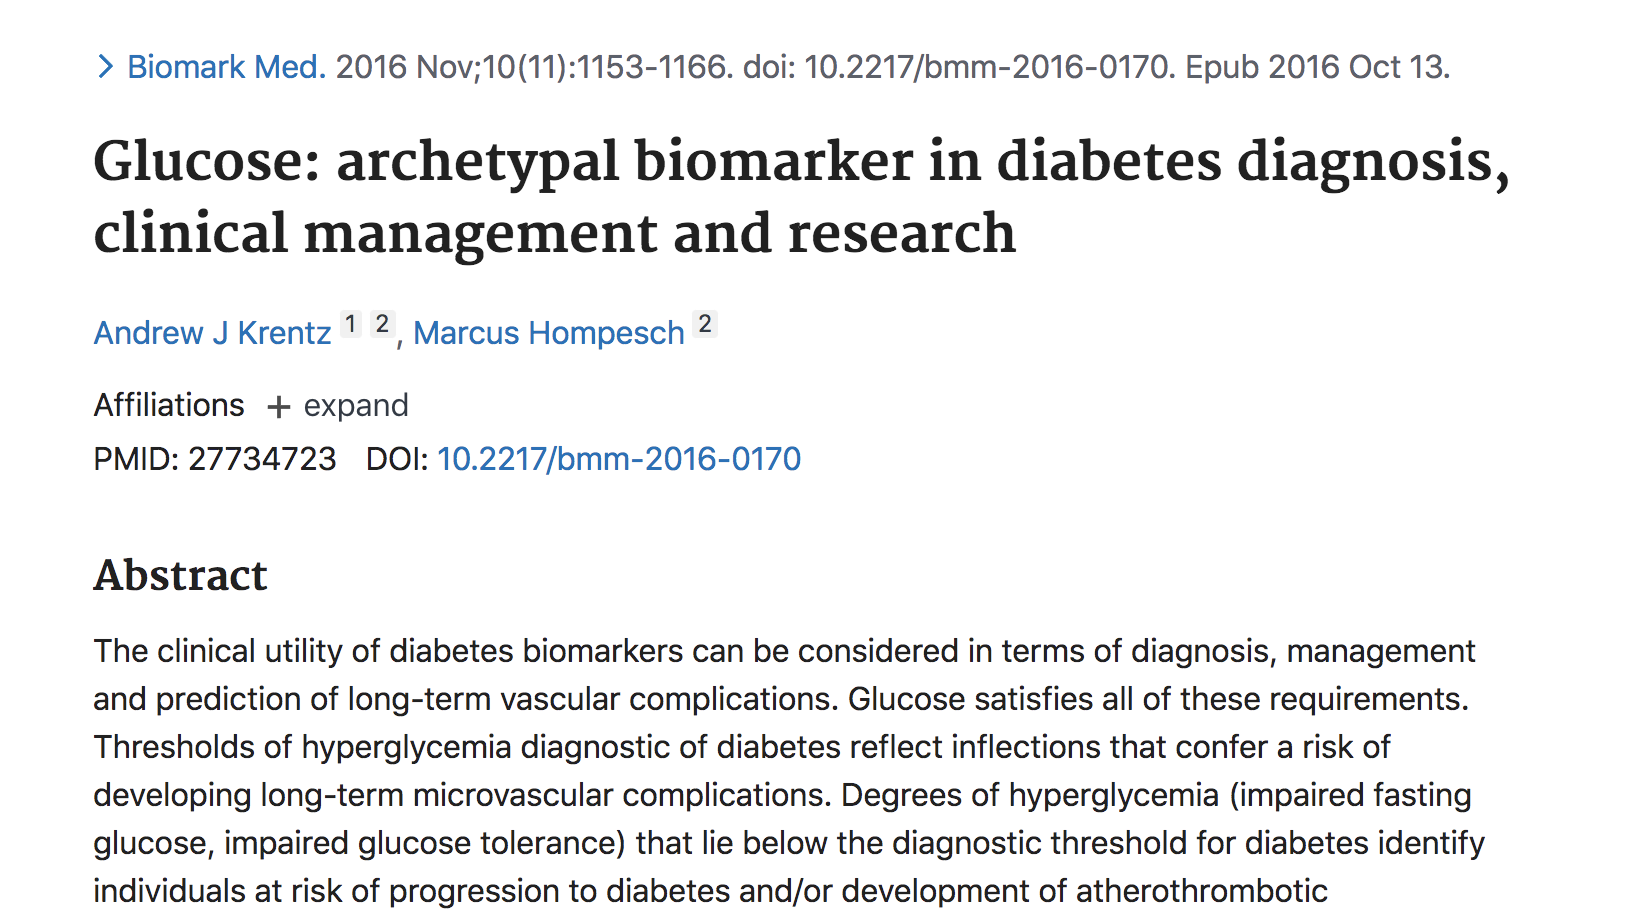 image of Glucose: archetypal biomarker in diabetes diagnosis, clinical management and research.